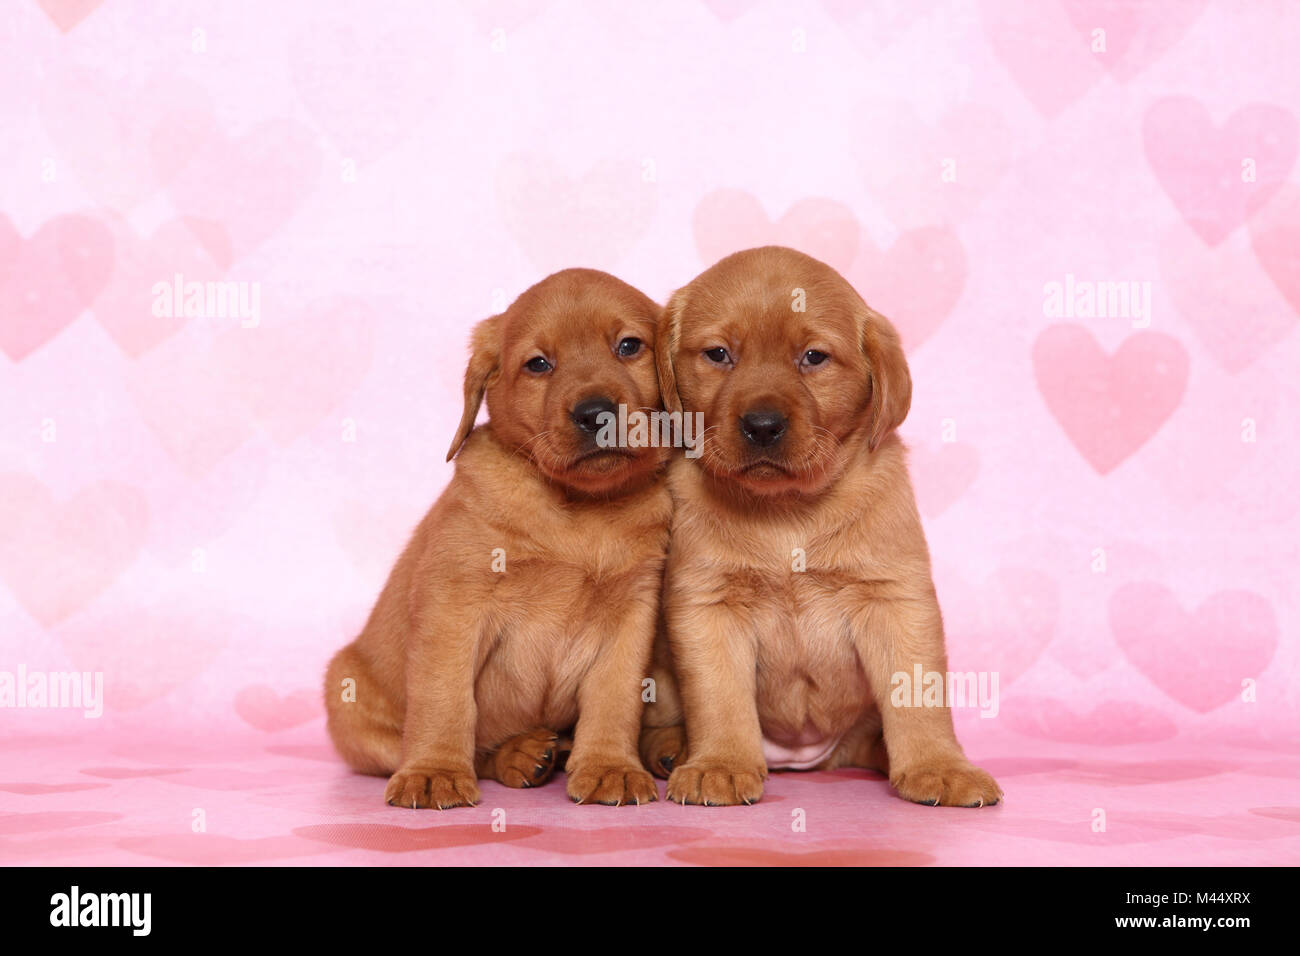 Labrador Retriever. Two puppies (6 weeks old) sitting next to each other. Studio picture seen against a pink background with heart print. Germany Stock Photo